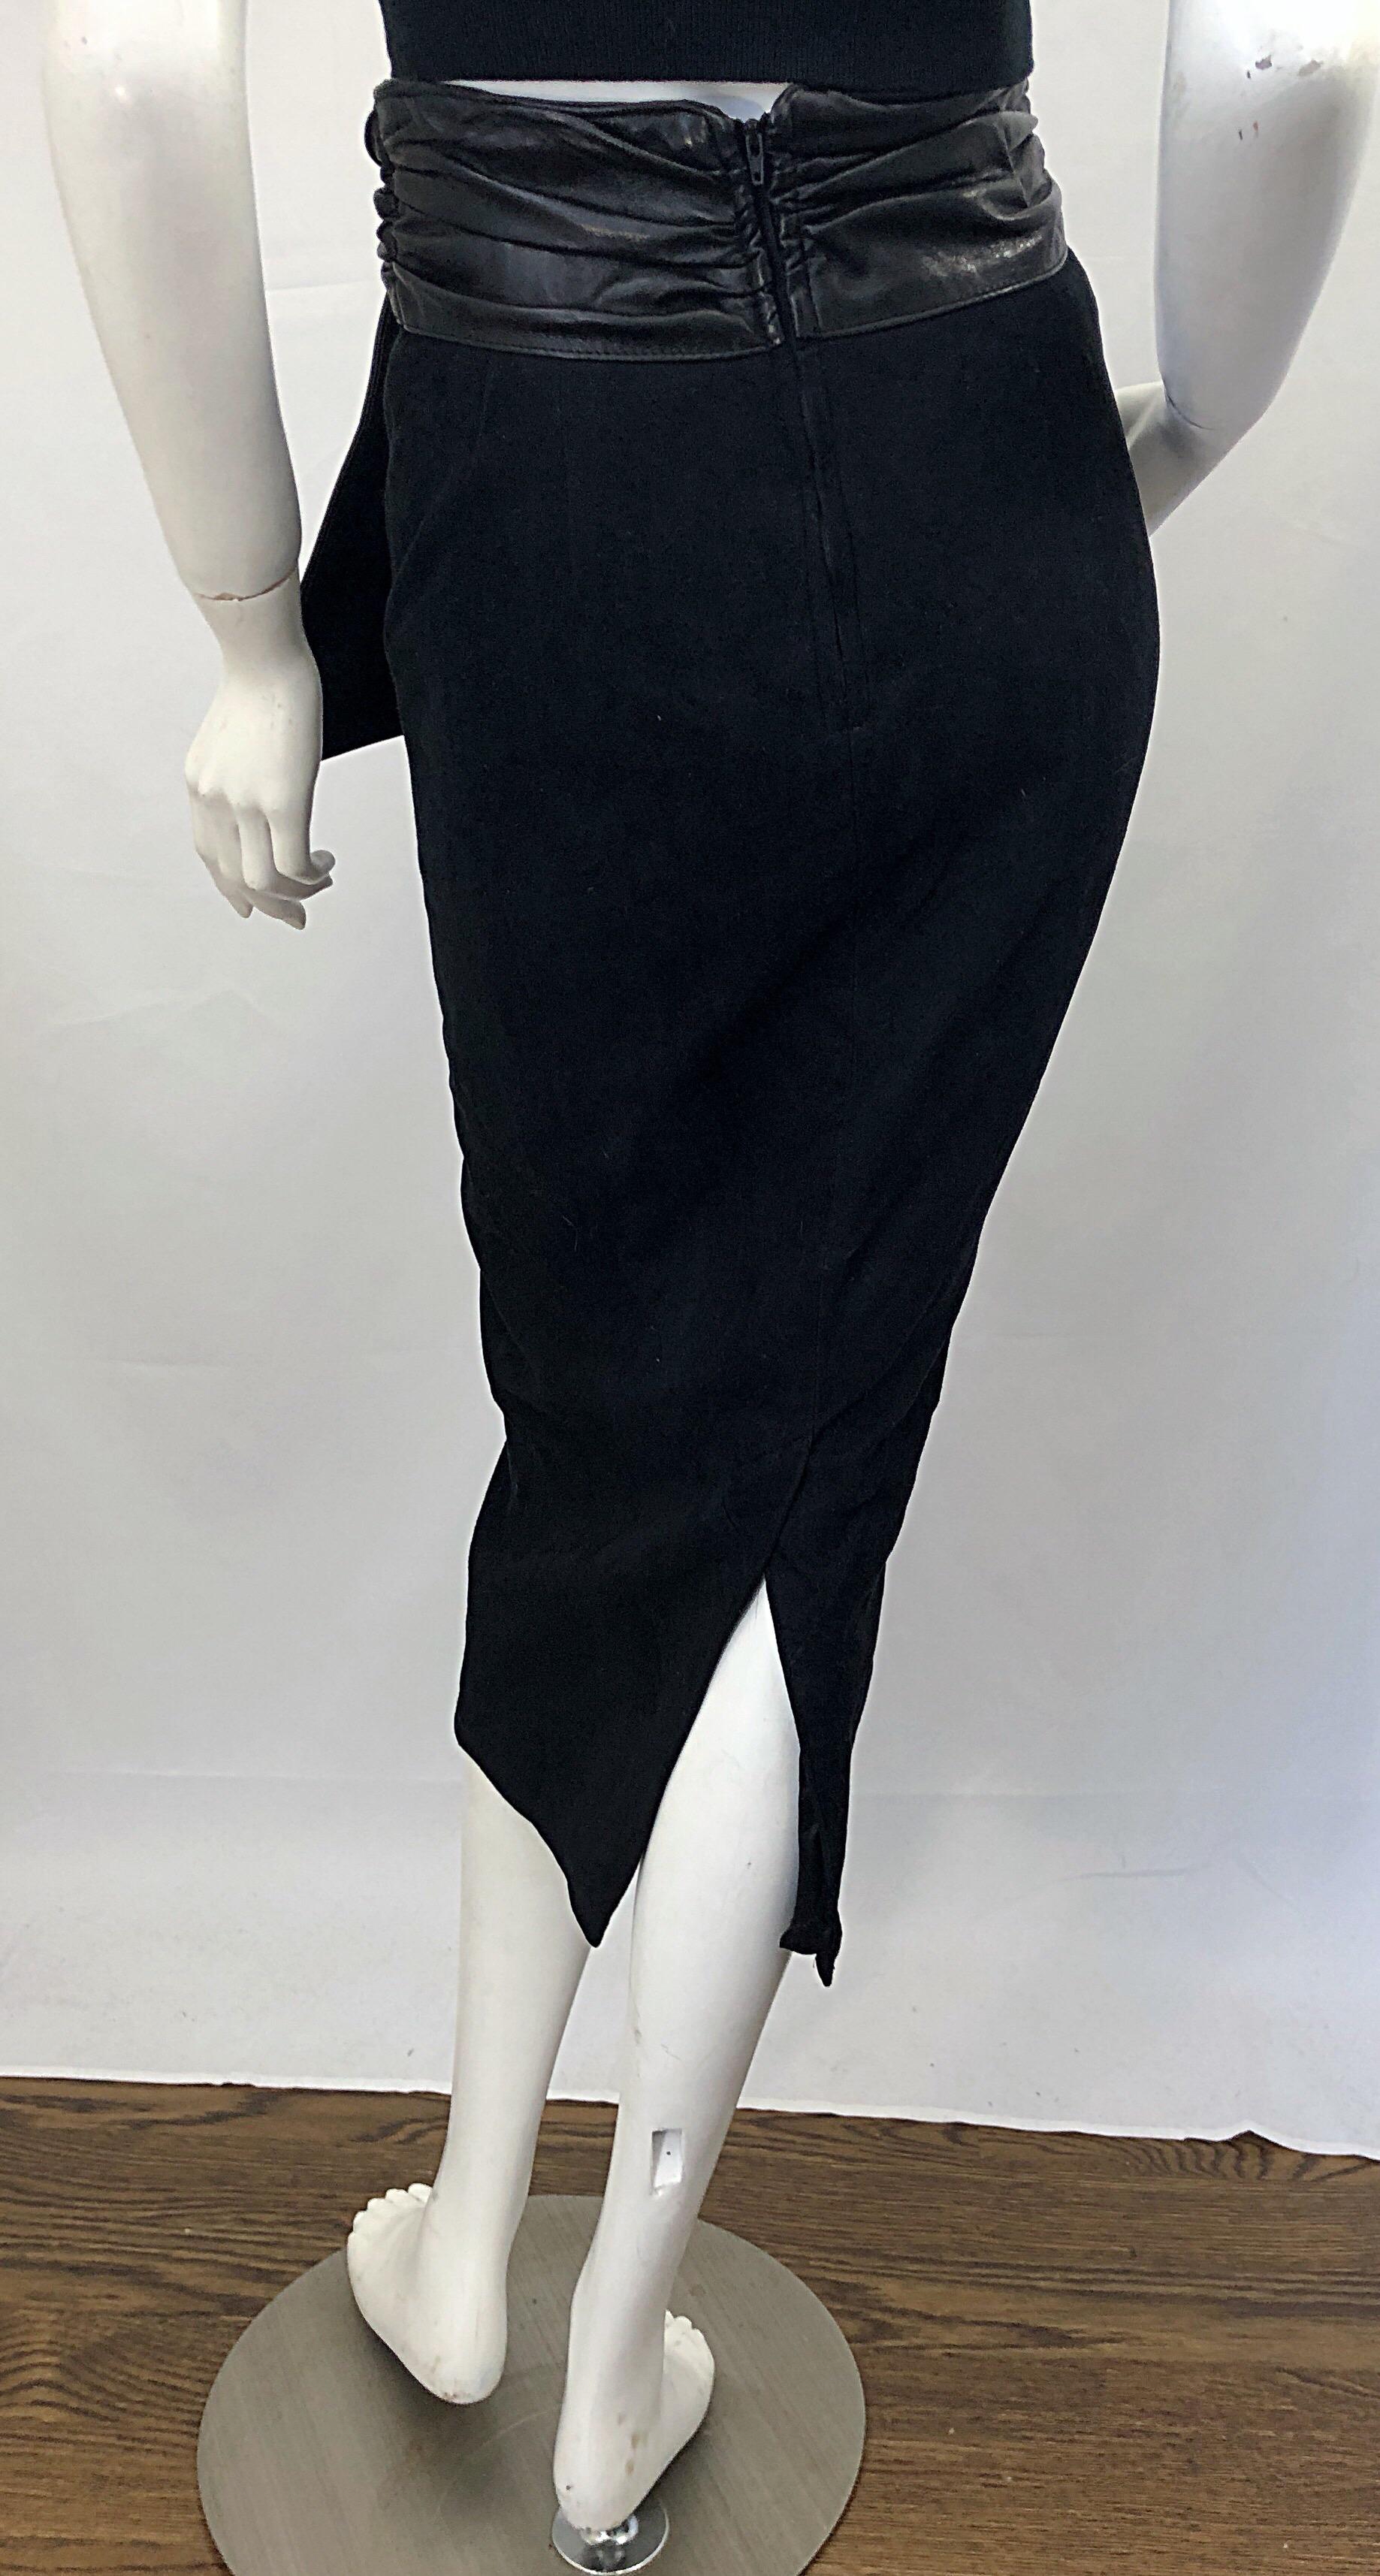 1990s Vakko Black Suede + Leather Size 4 High Waisted Vintage 90s Midi Skirt 3